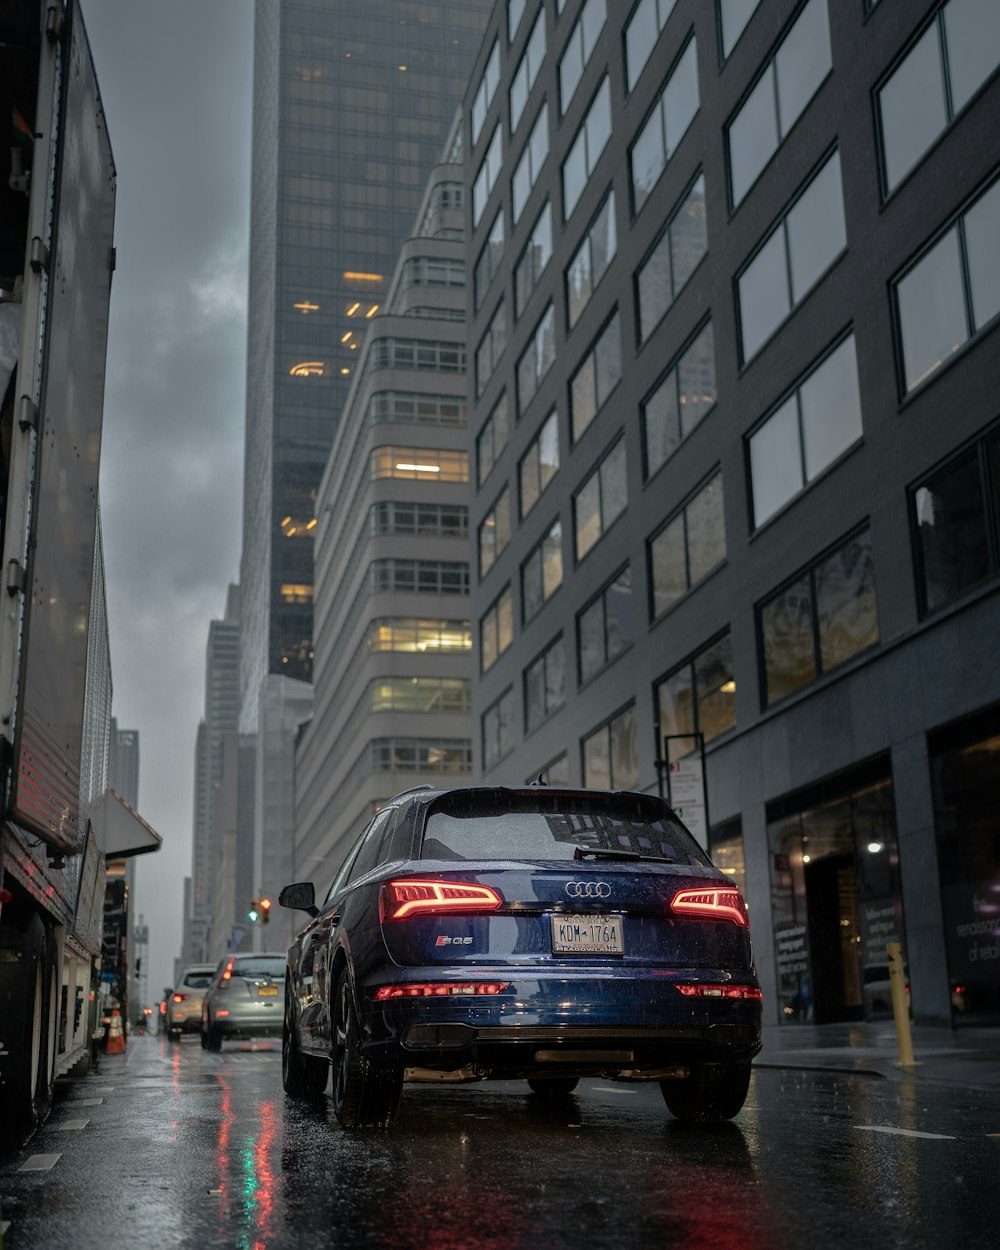 black audi a 4 on road in between high rise buildings during daytime